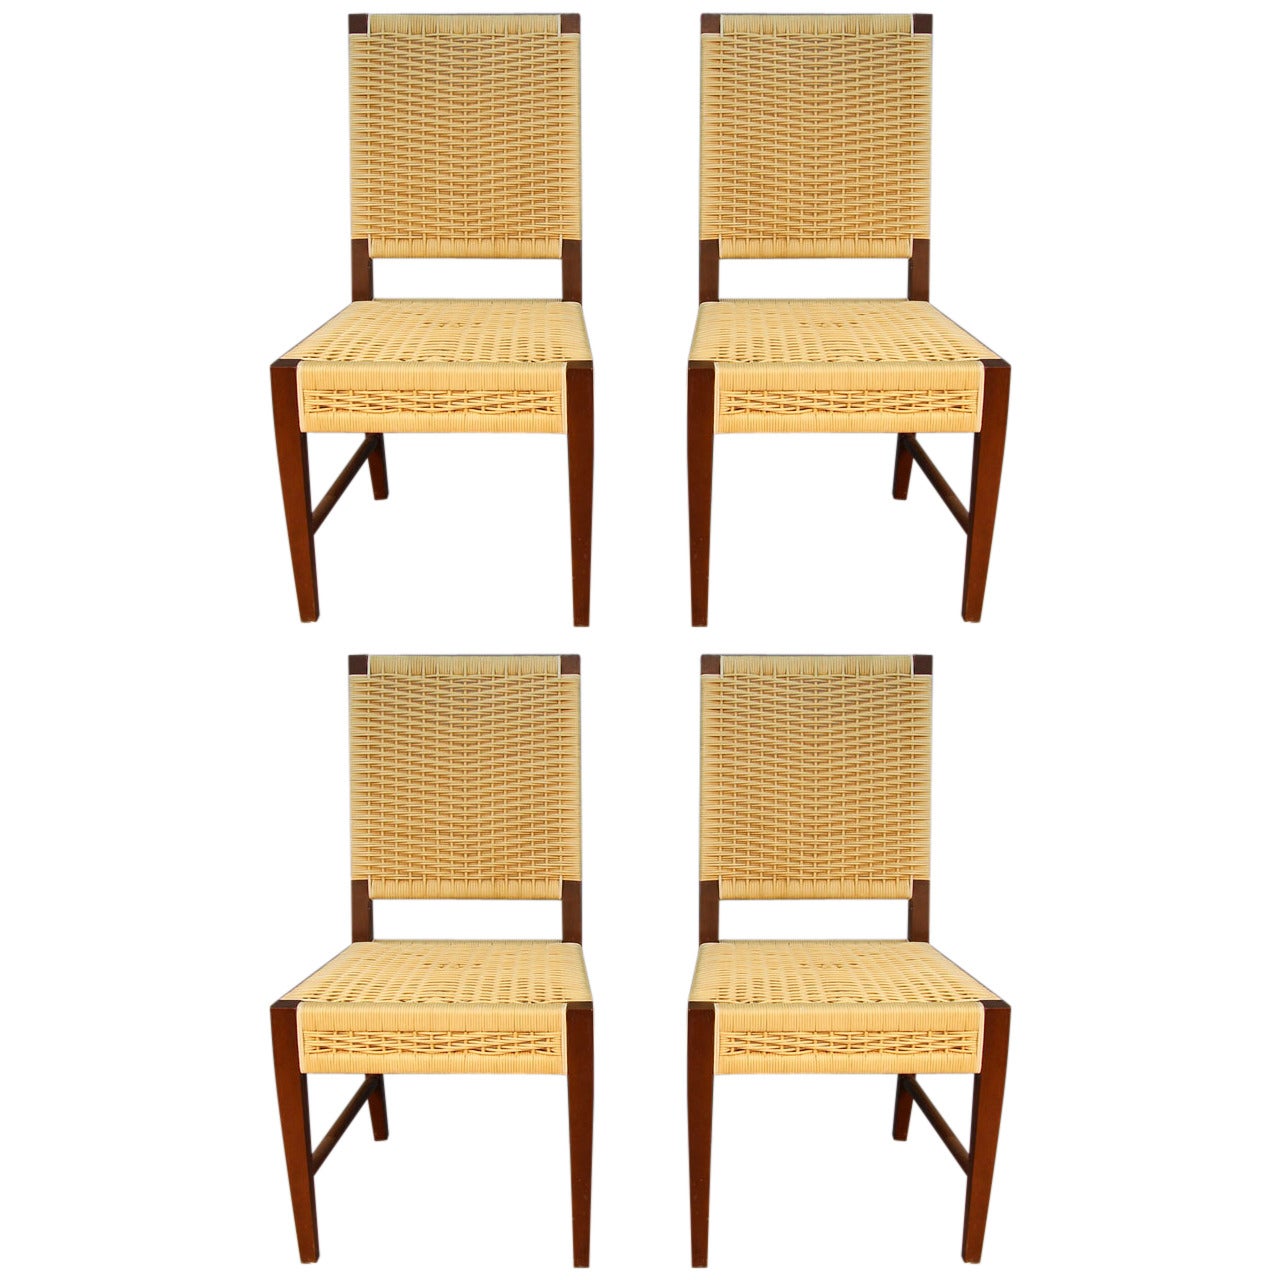 Set of Four Donghia Dining Chairs in Merbau Wood with Raffia Weaving